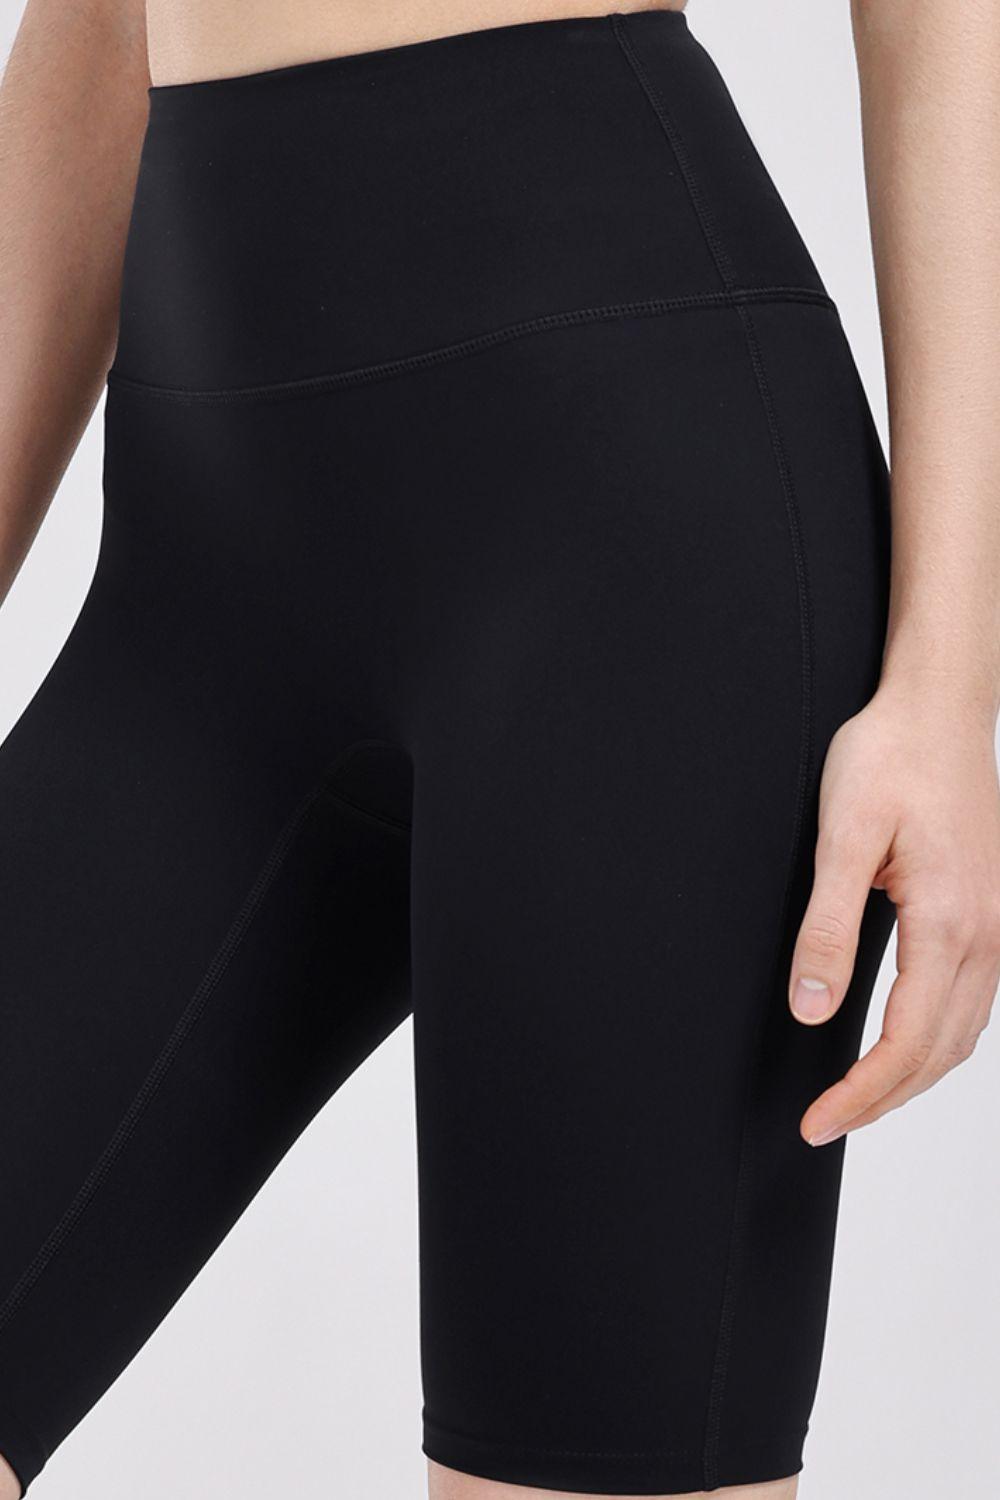 a close up of a woman's black shorts